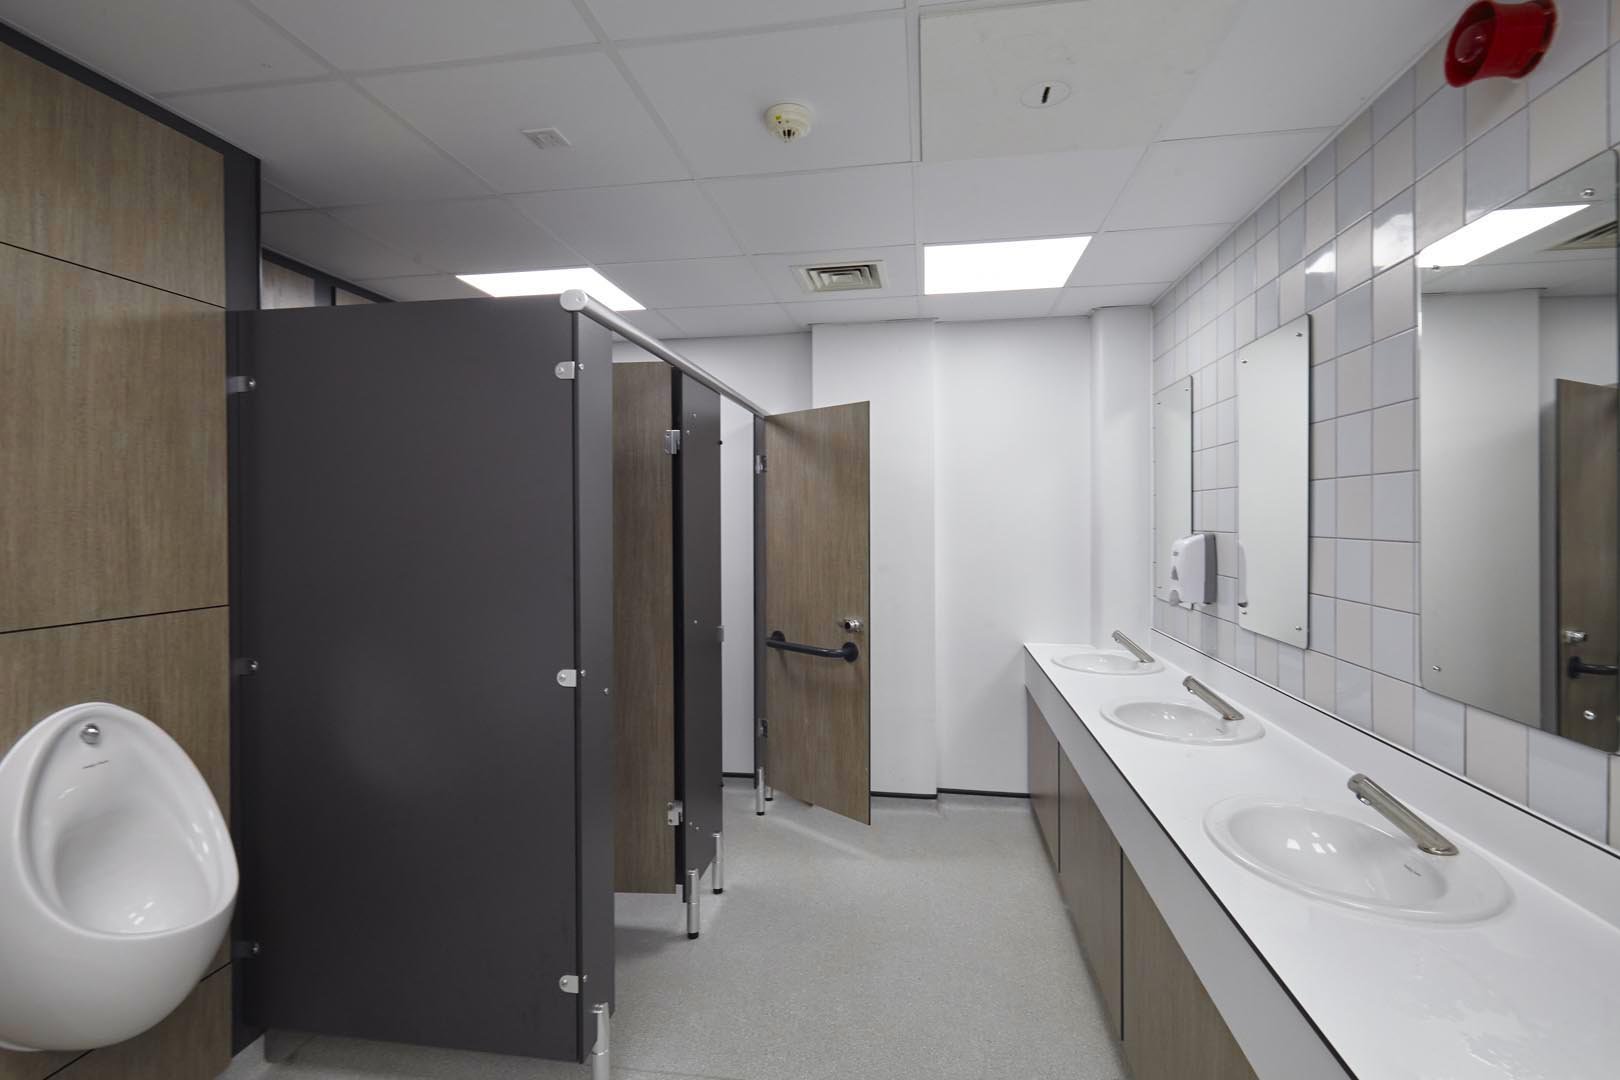 male washroom at leicester college with woodgrain urinal ducts, cubicles and a vanity unit hand wash area with feature tiling and mirror at leicester college.jpg